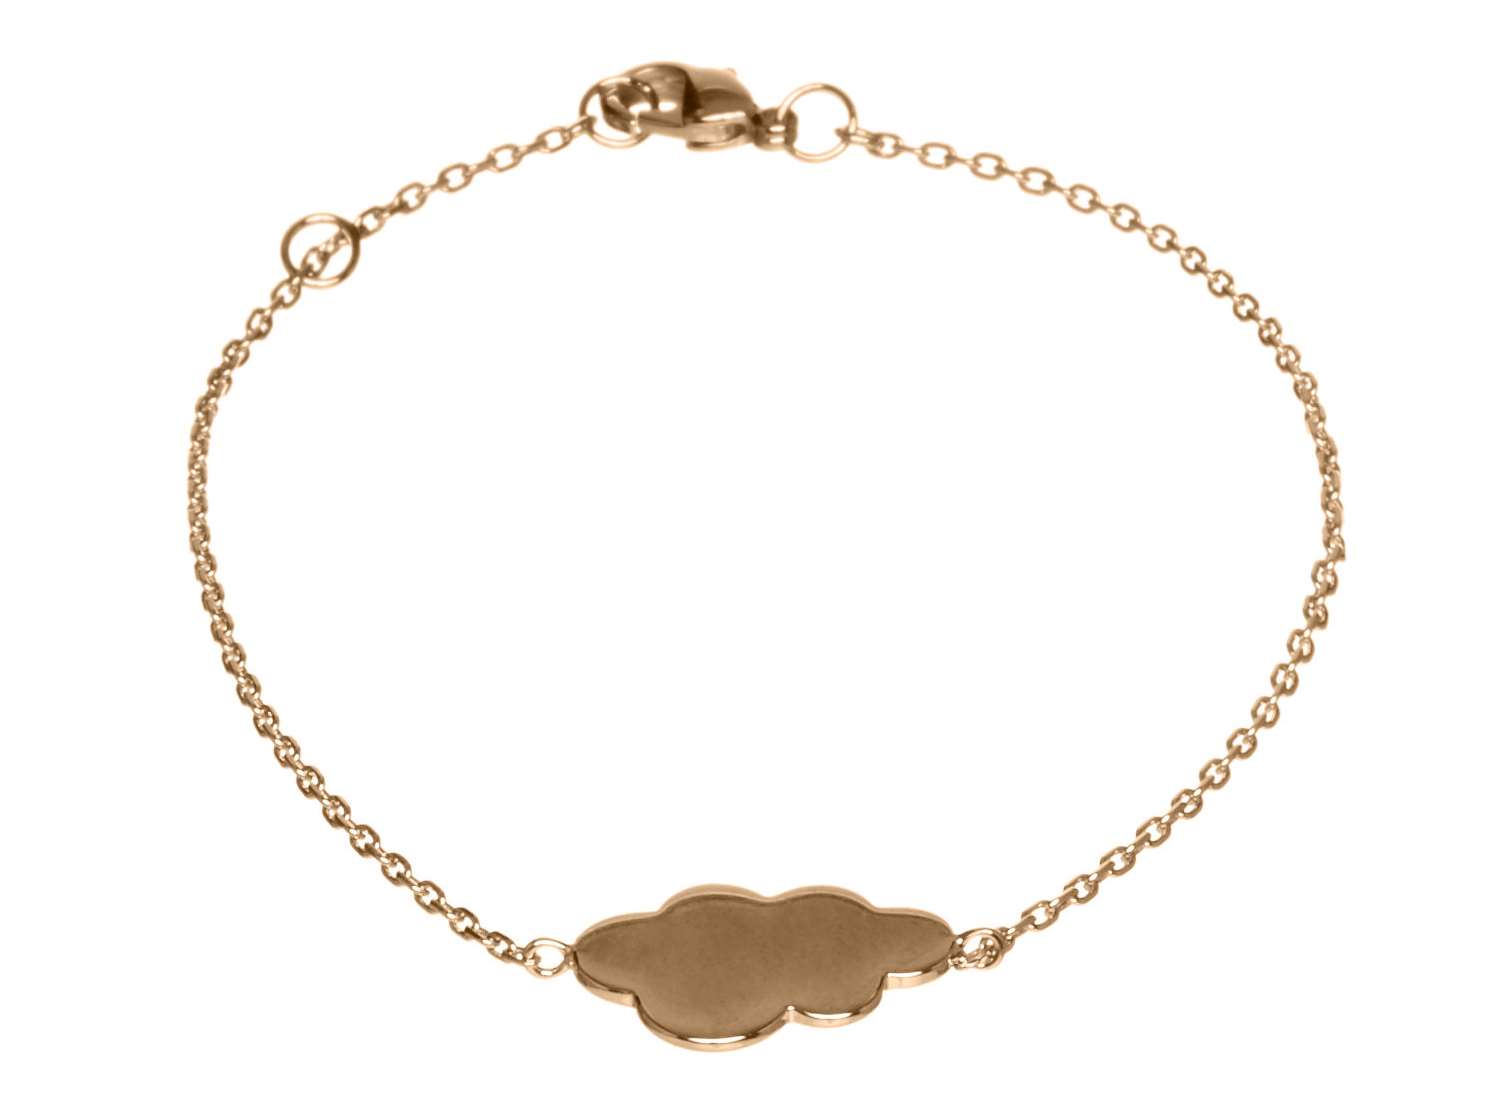 Elise & Moi Cloud Bracelet Gold Fill, £30.89, available from Etsy